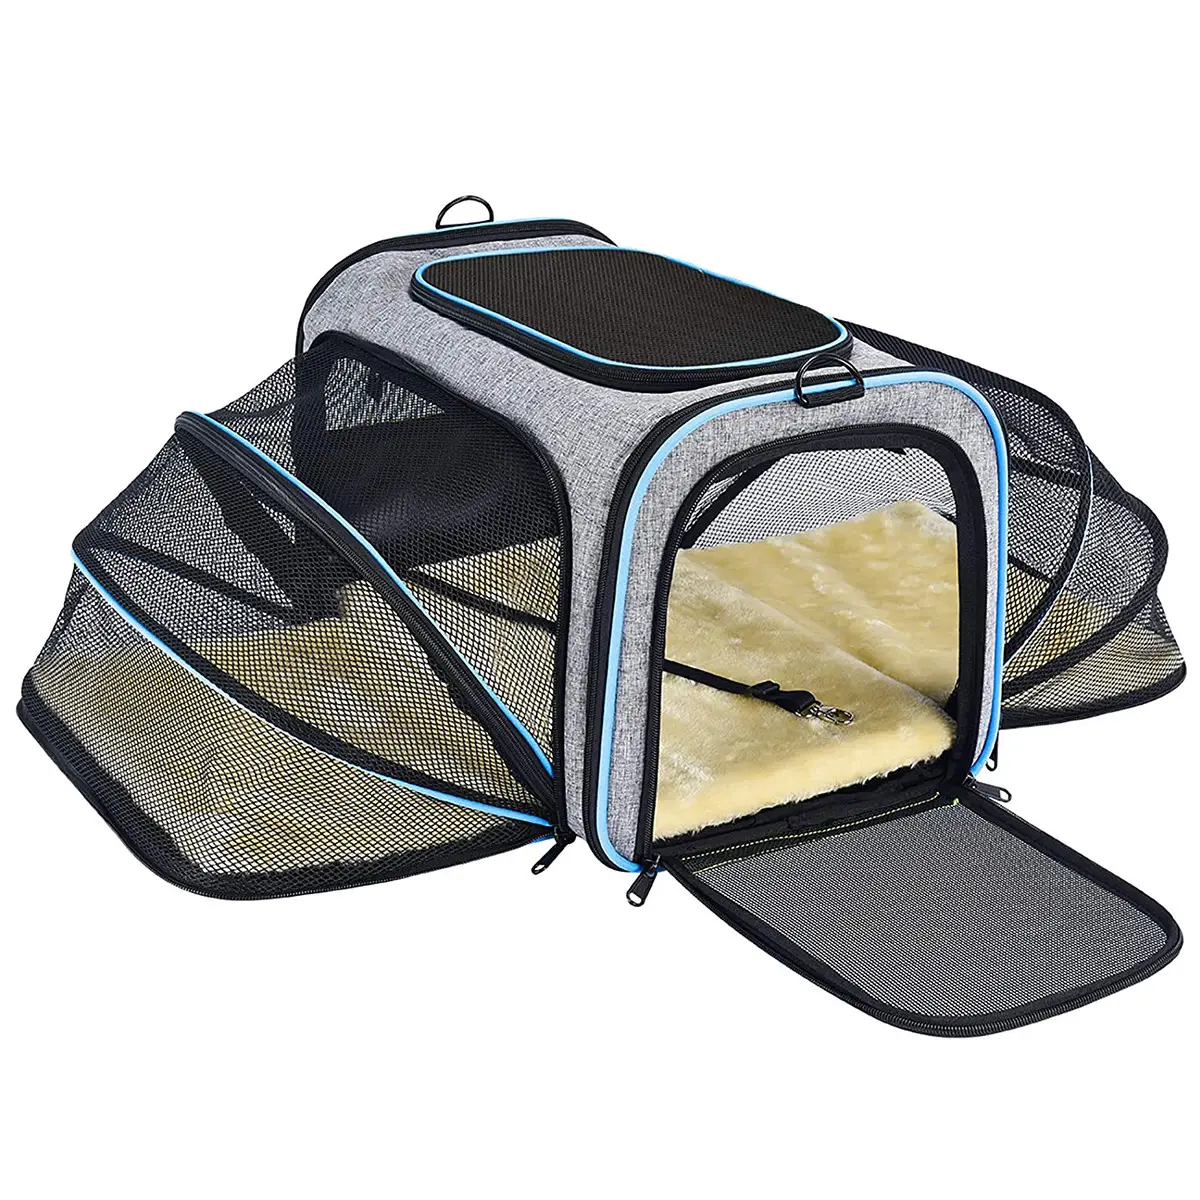 Hot Sale Pet Carrier Bag Airline Approved Small Dog Carrier Soft Sided Collapsible Portable Travel Dog Carrier